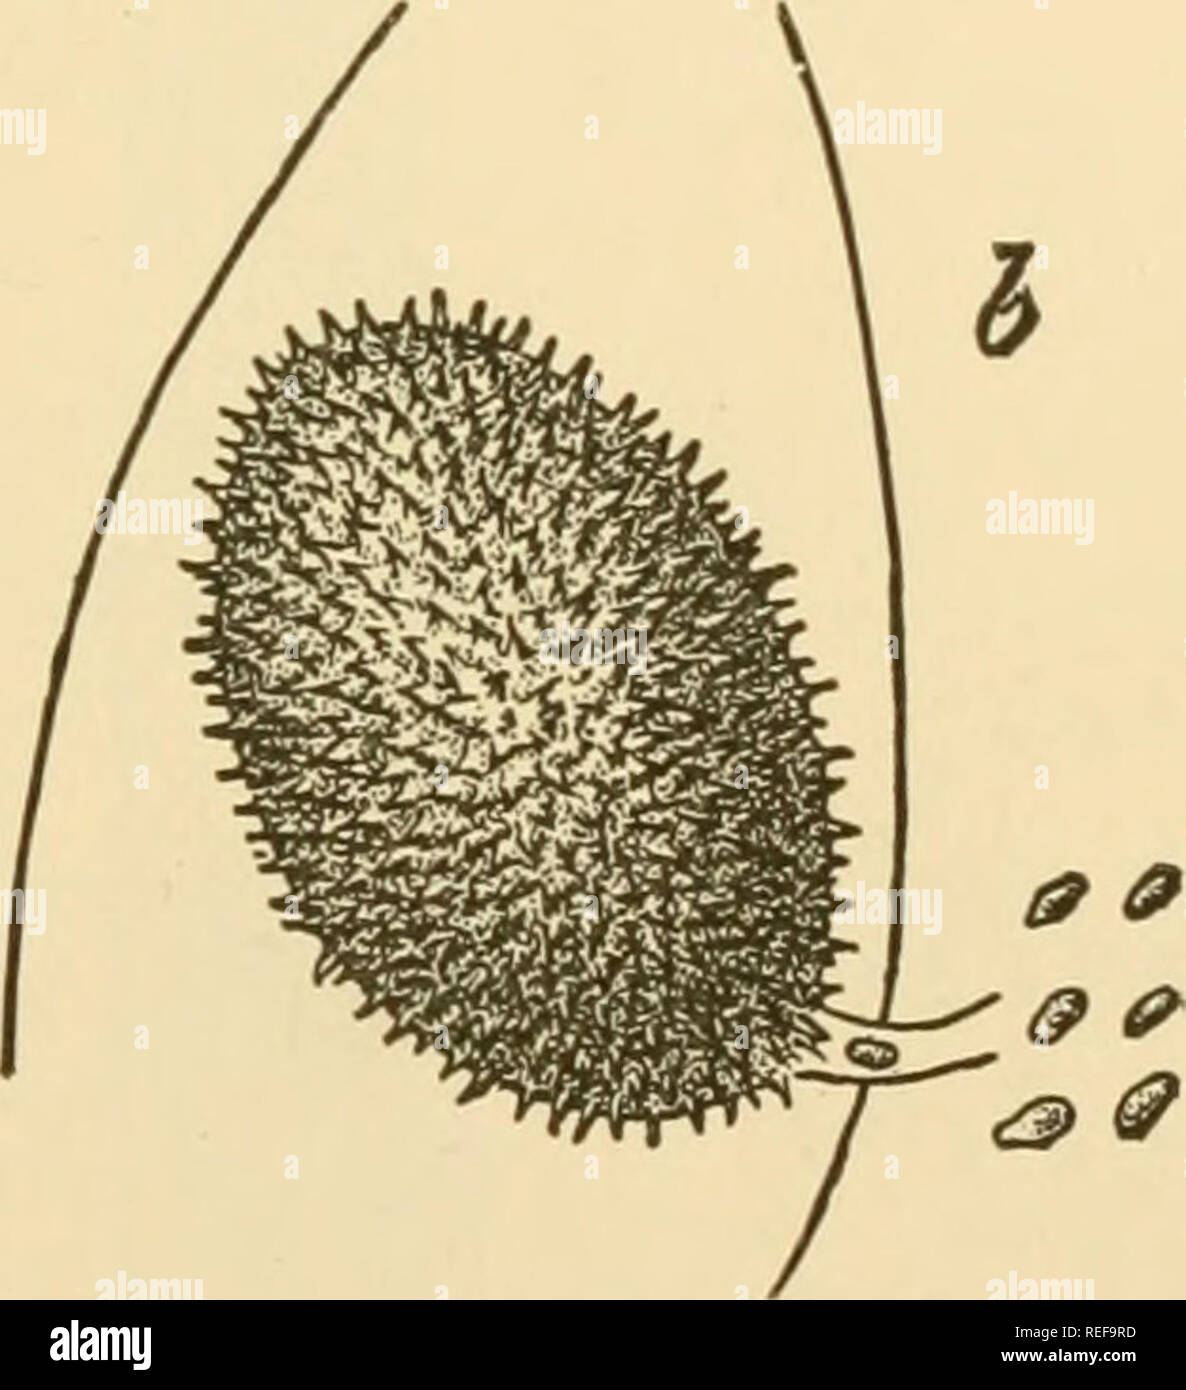 . Comparative morphology of Fungi. Fungi. Fig. 16.—Pscudolpidium Saprolegniae. a, swollen host hyphae with 3 sporangia; b, hypnospore. (X 320; after A. Fischer, 1882.) The empty male cell membranes remain connected to the zygote as &quot; appendiculate cells.&quot; The further fate of the nuclei is unknown. The endospore becomes brown and thickened while the echinulate exposore remains hyaline. They germinate by zoospores which discharge through an emission collar (Barrett, 1912). Pseudolpidium Saprolegniae, also parasitic on Saprolegnia, in structure and habit resembles Olpidiopsis but differ Stock Photo